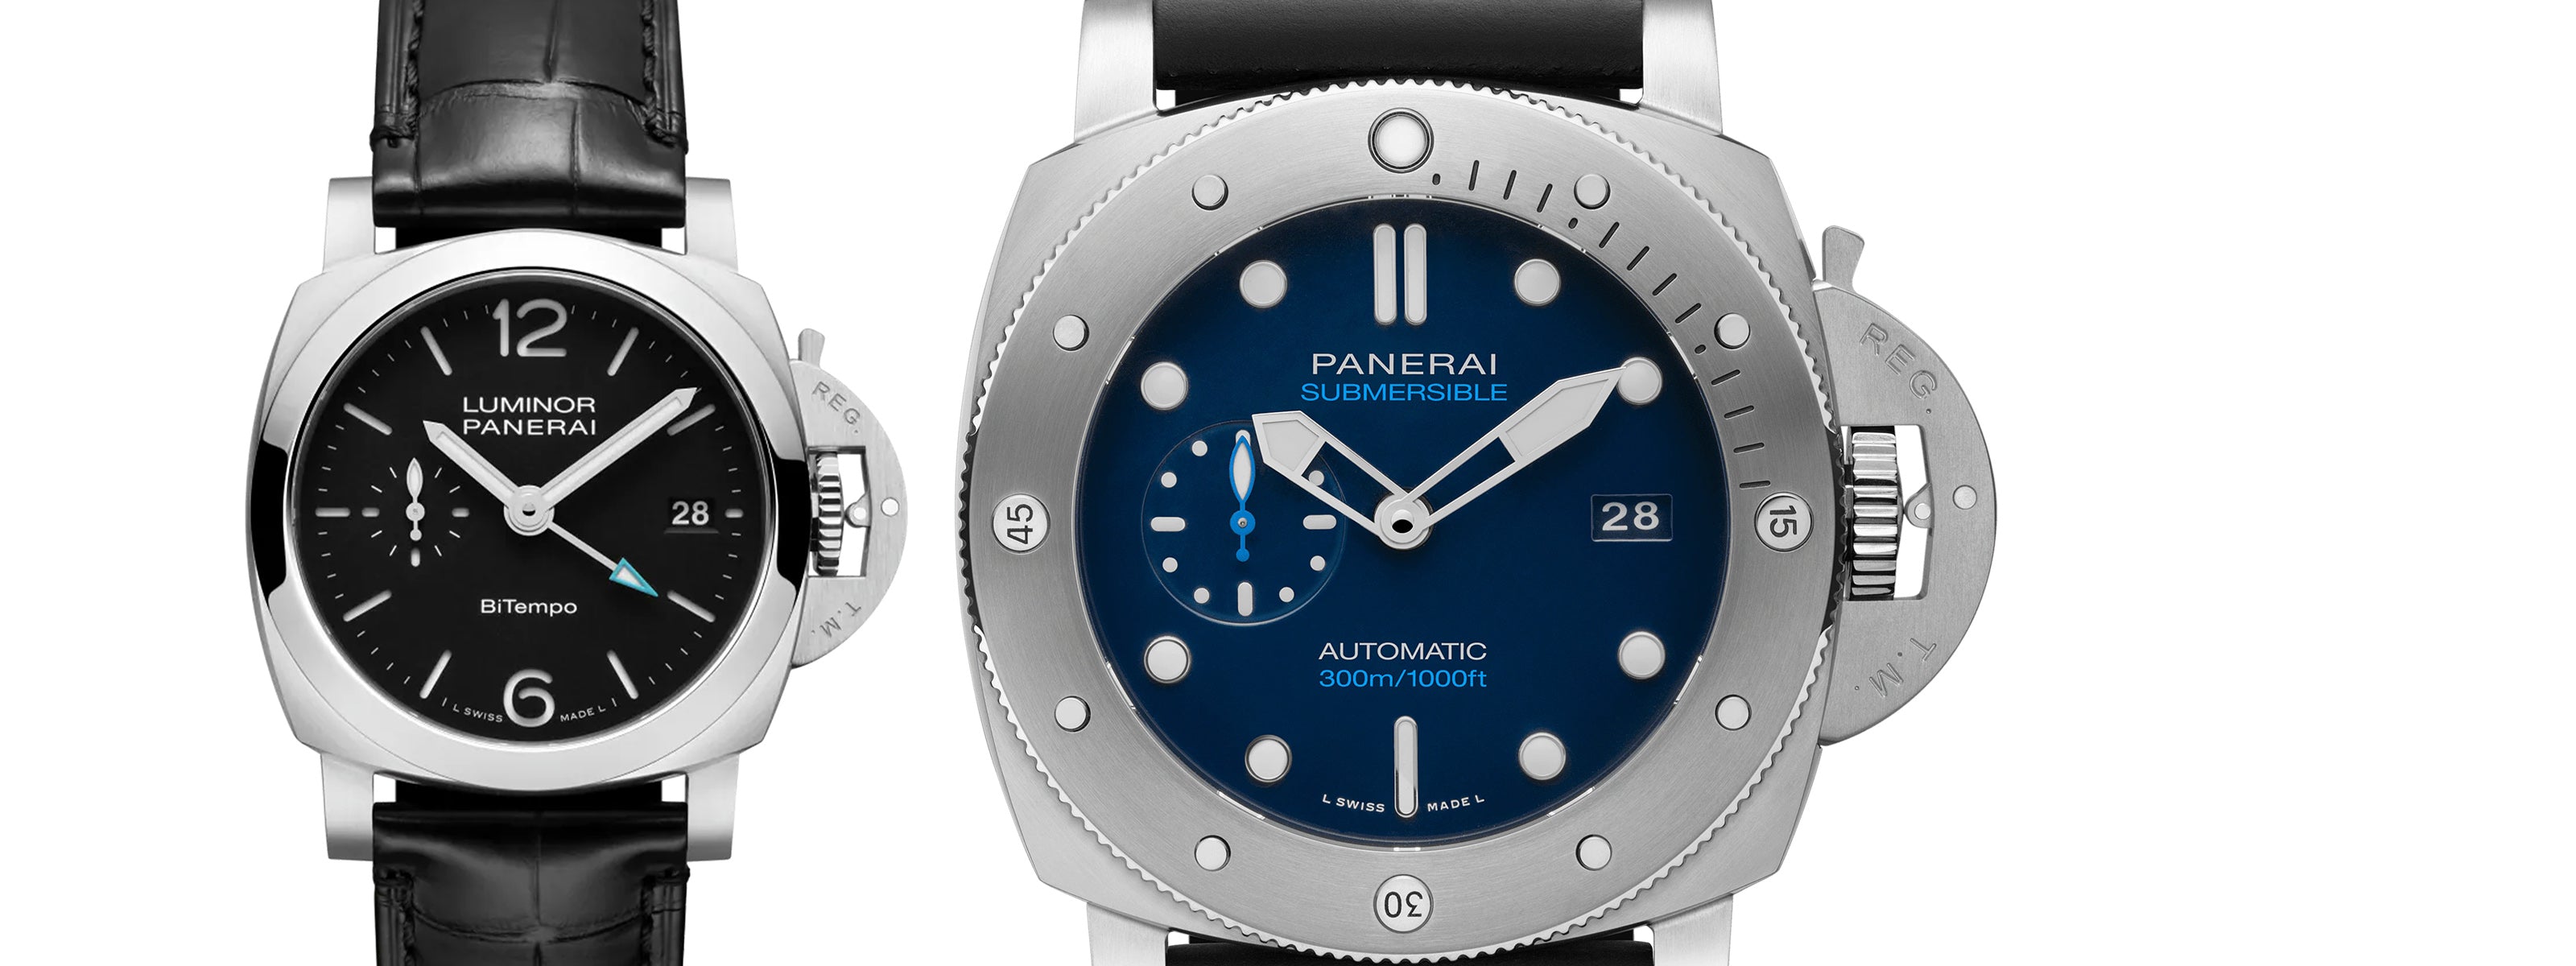 What Are the Best Panerai Watches to Buy?